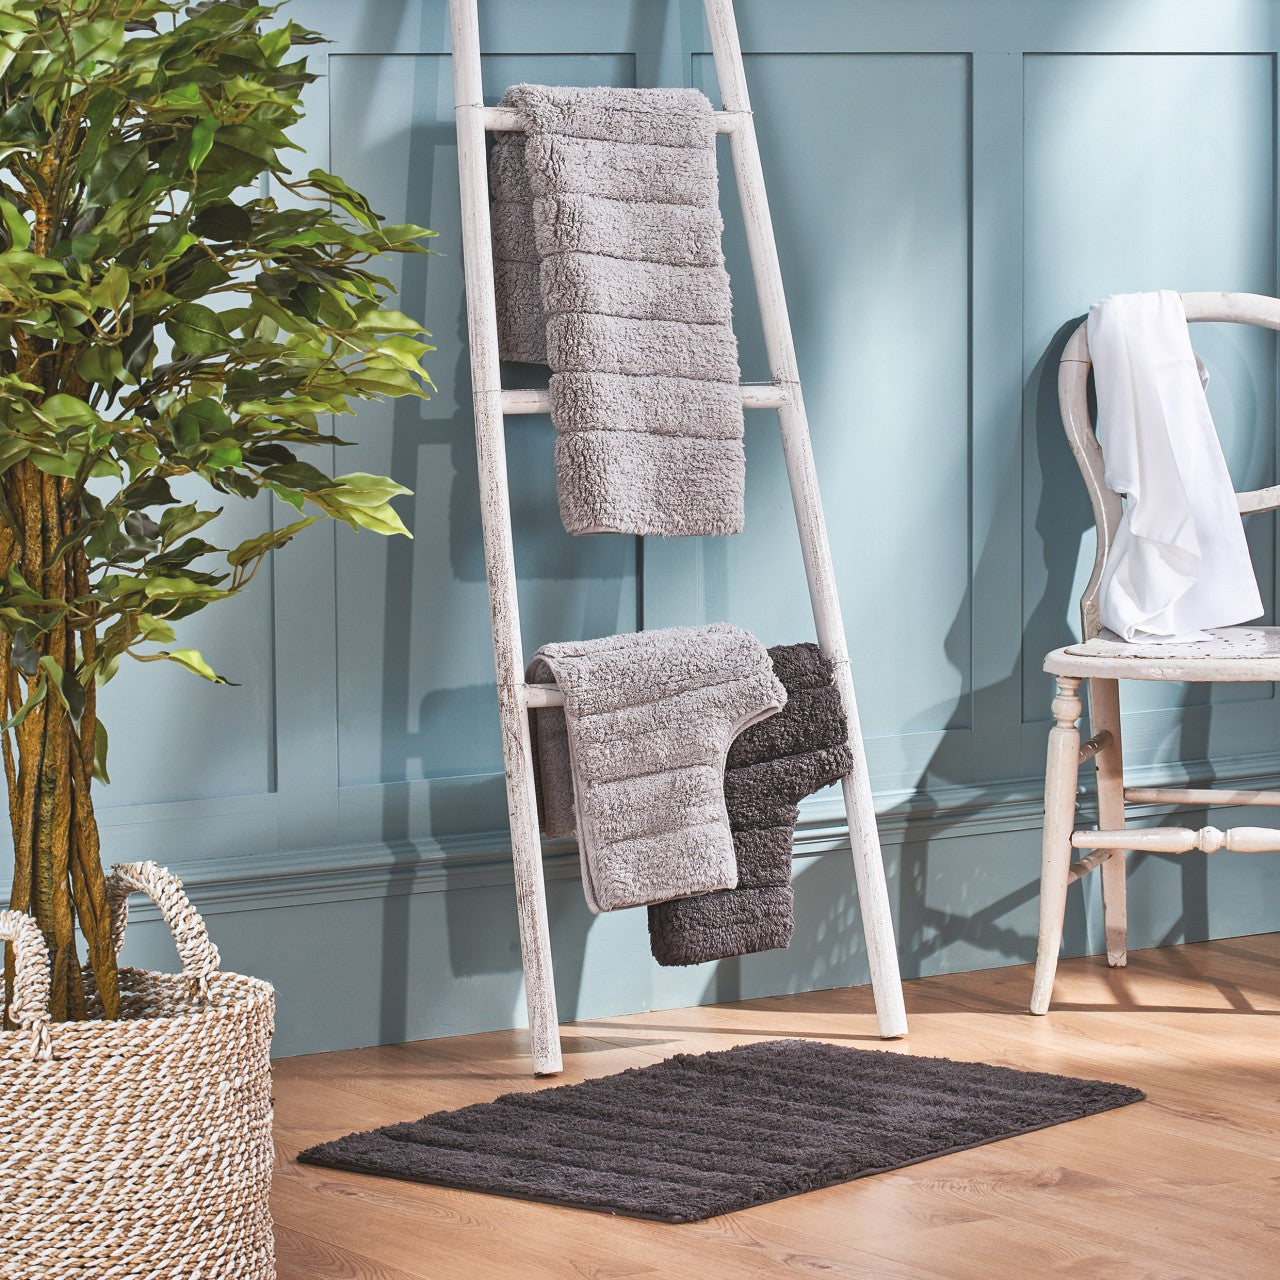 Bath Mat Sets for All Budgets: Add Style & Comfort to Your Bathroom